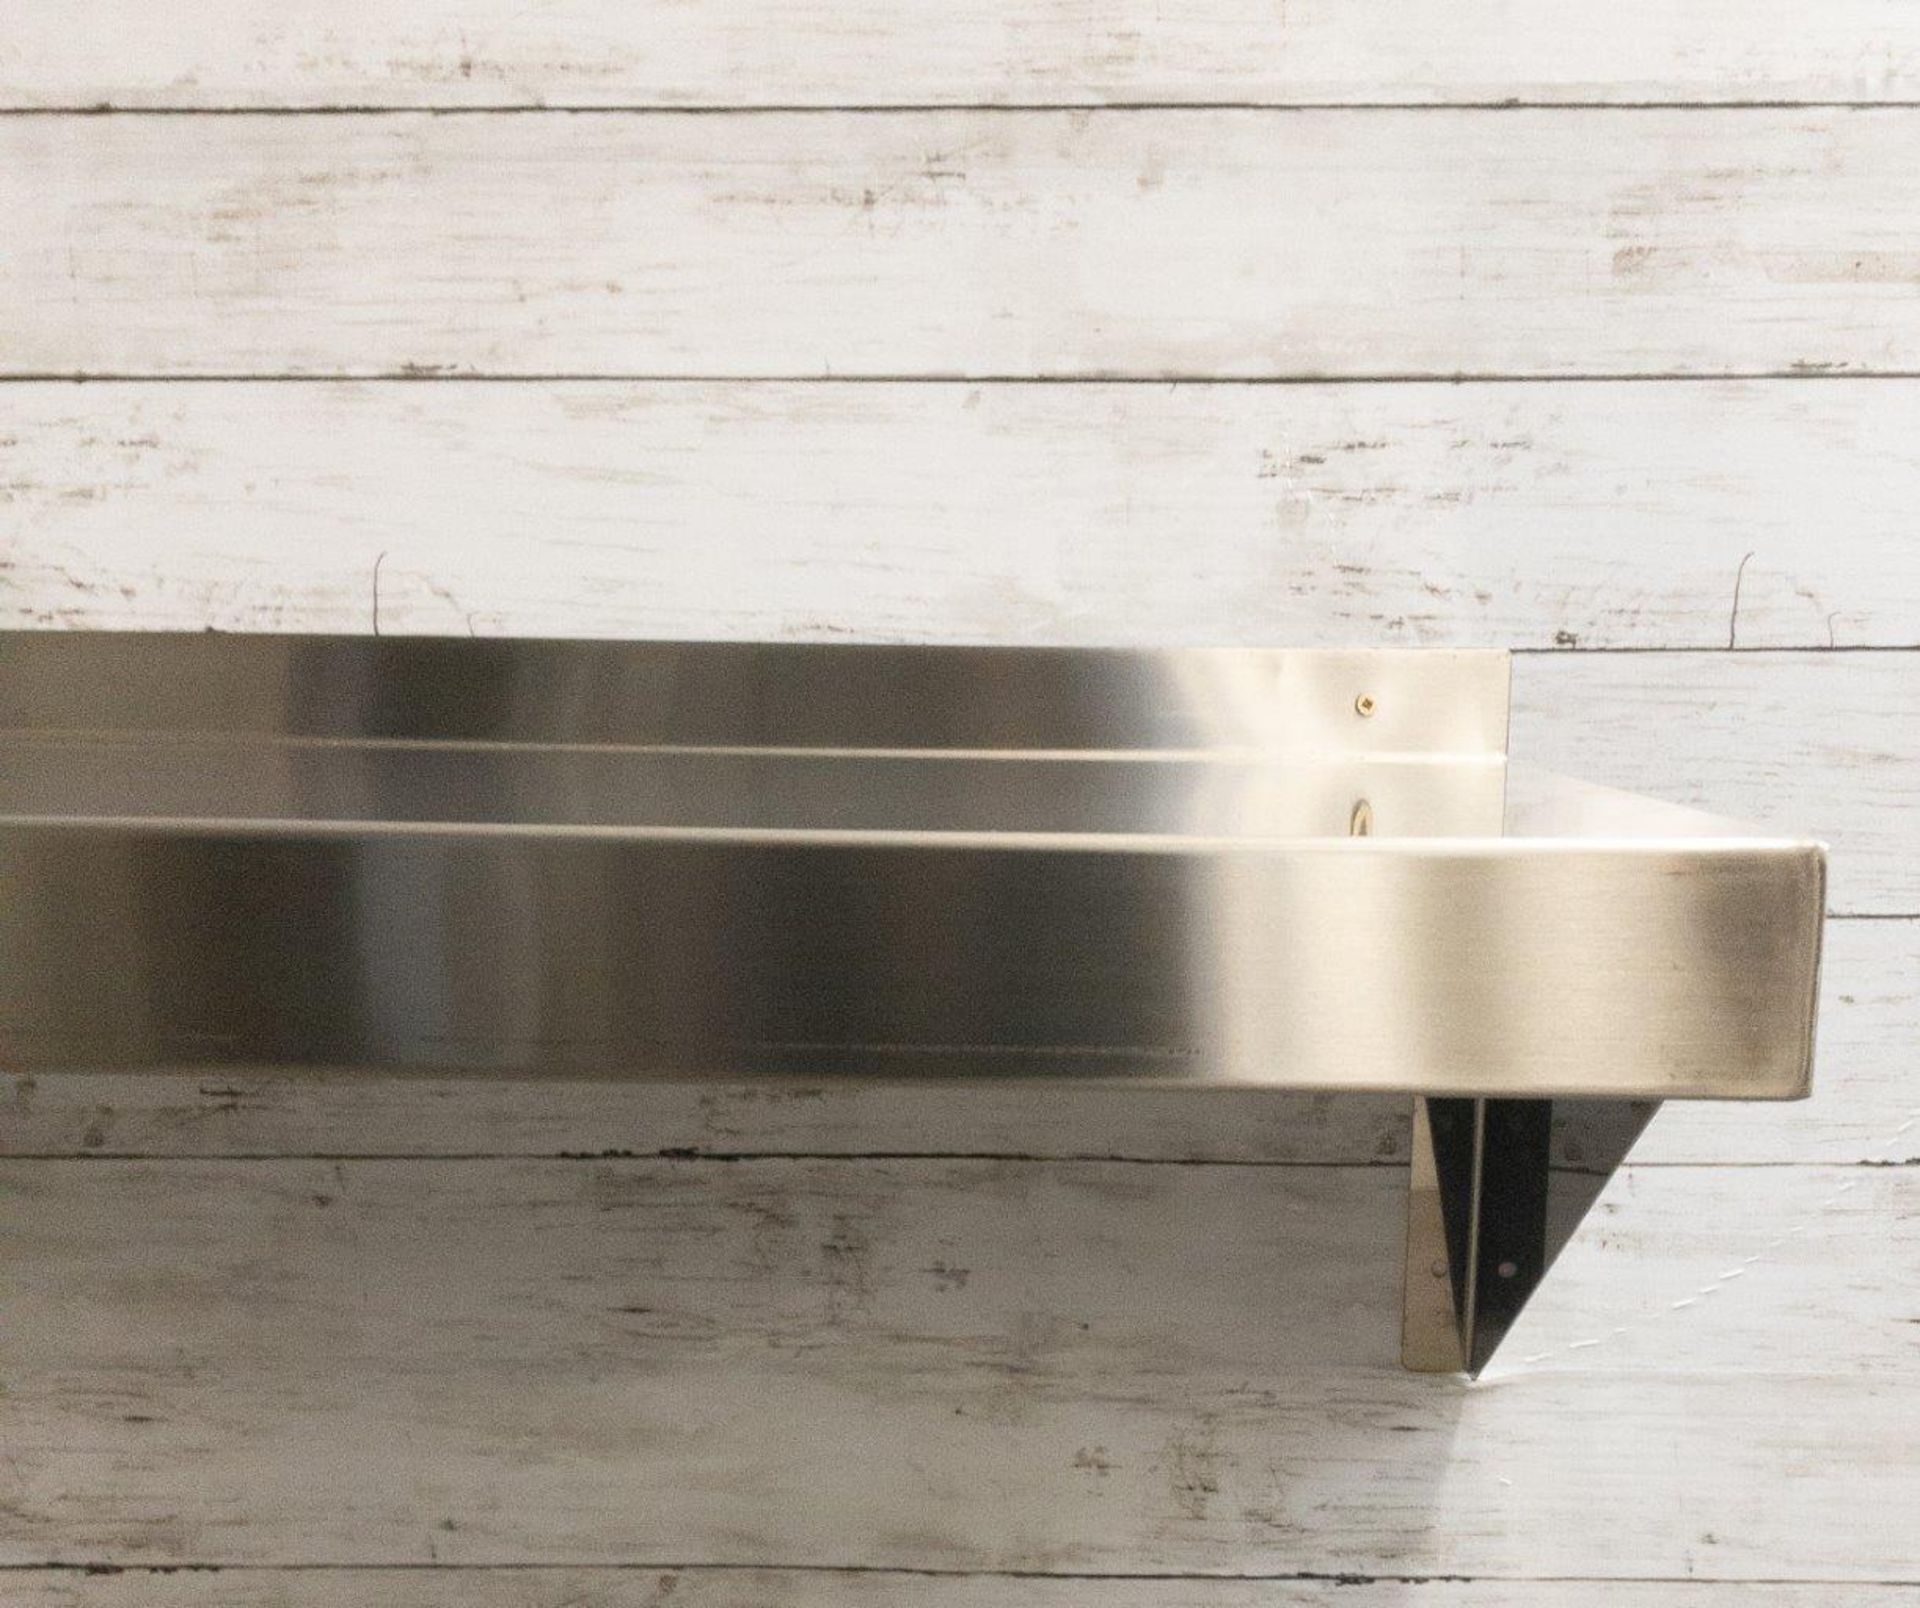 16" X 60" STAINLESS STEEL SHELF, OMCAN 24411 - Image 3 of 5